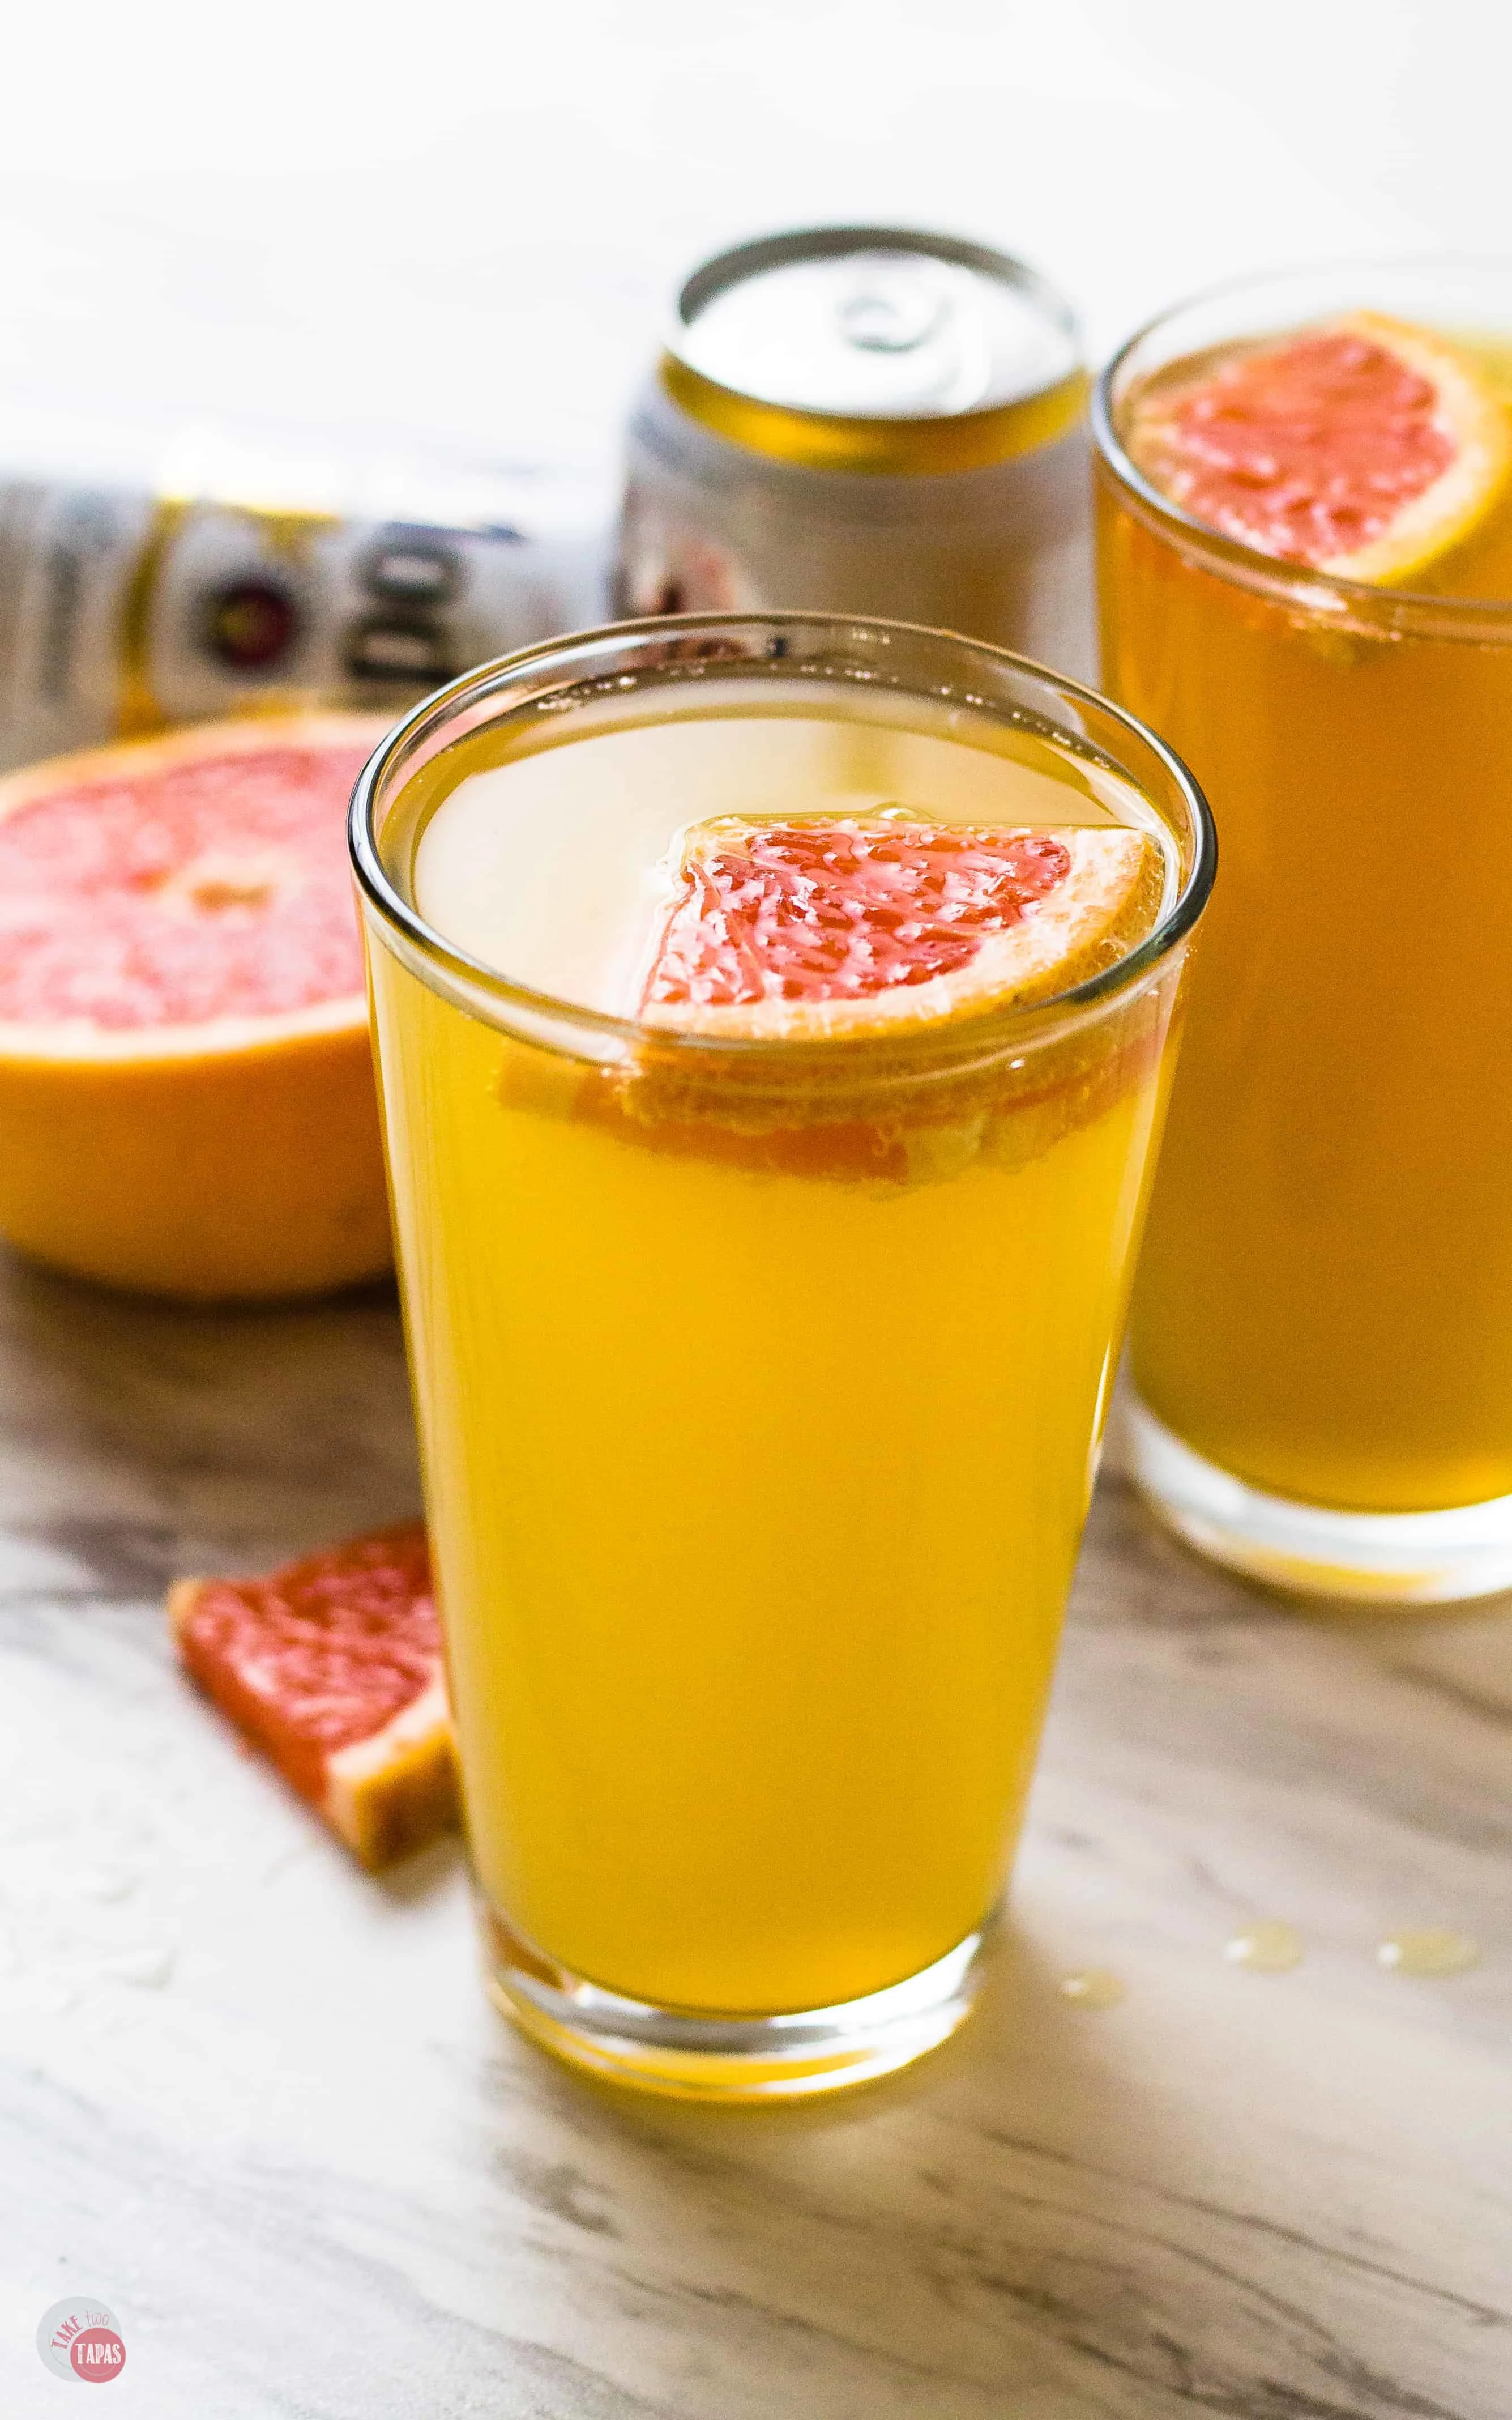 A delicious beer cocktail is a Grapefruit Shandy | Take Two Tapas | #Grapefruit #Shandy #GrapefruitShandy #Beer #Cocktail #Tequila #Summer #AD #CelebratorySips #CelebrateWithModelo